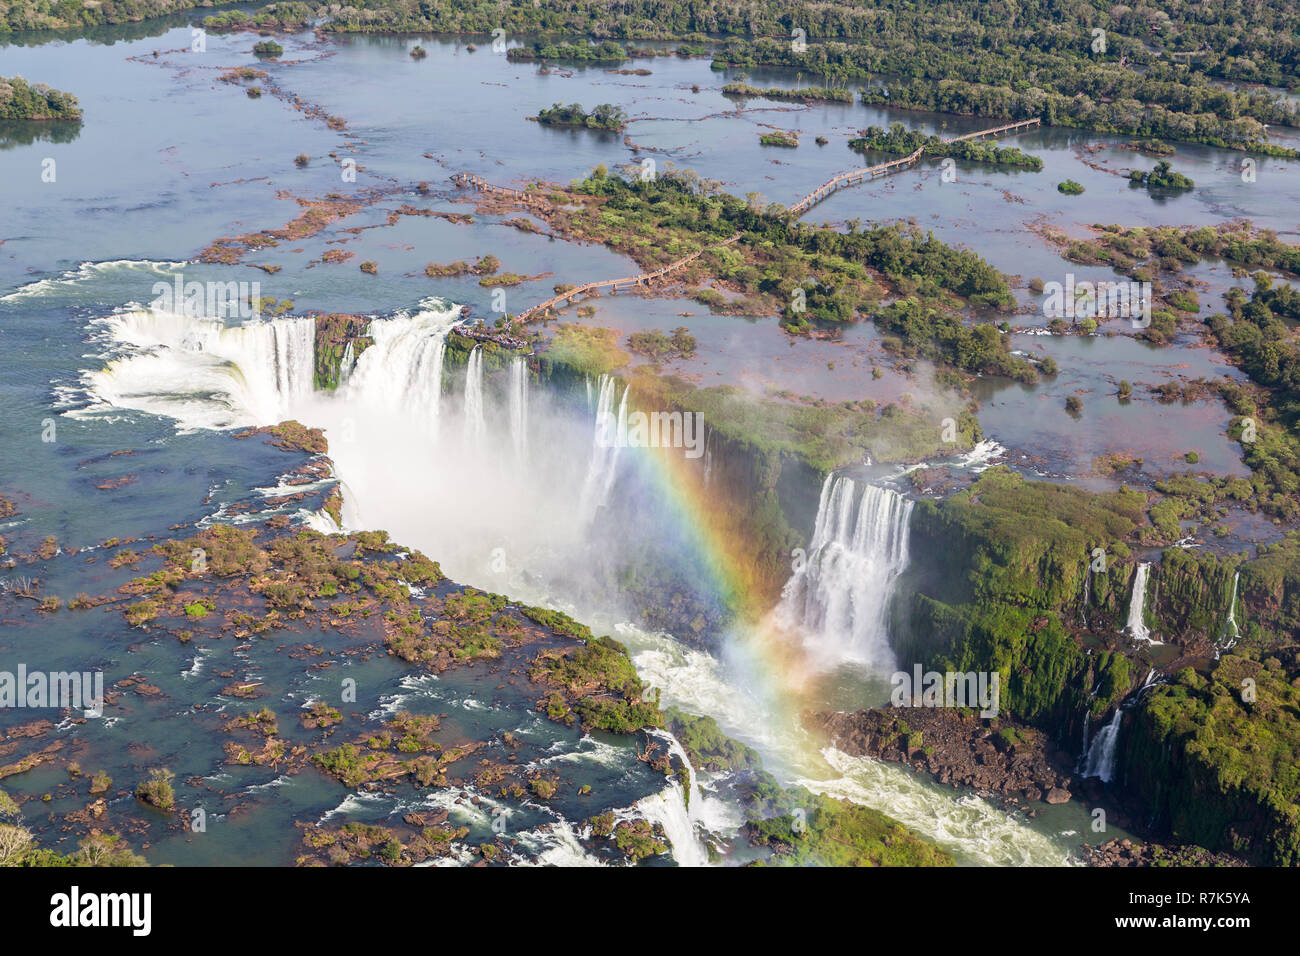 Aerial view of beautiful rainbow above Iguazu Falls Devil's Throat chasm from a helicopter flight. Brazil and Argentina. South America. Stock Photo